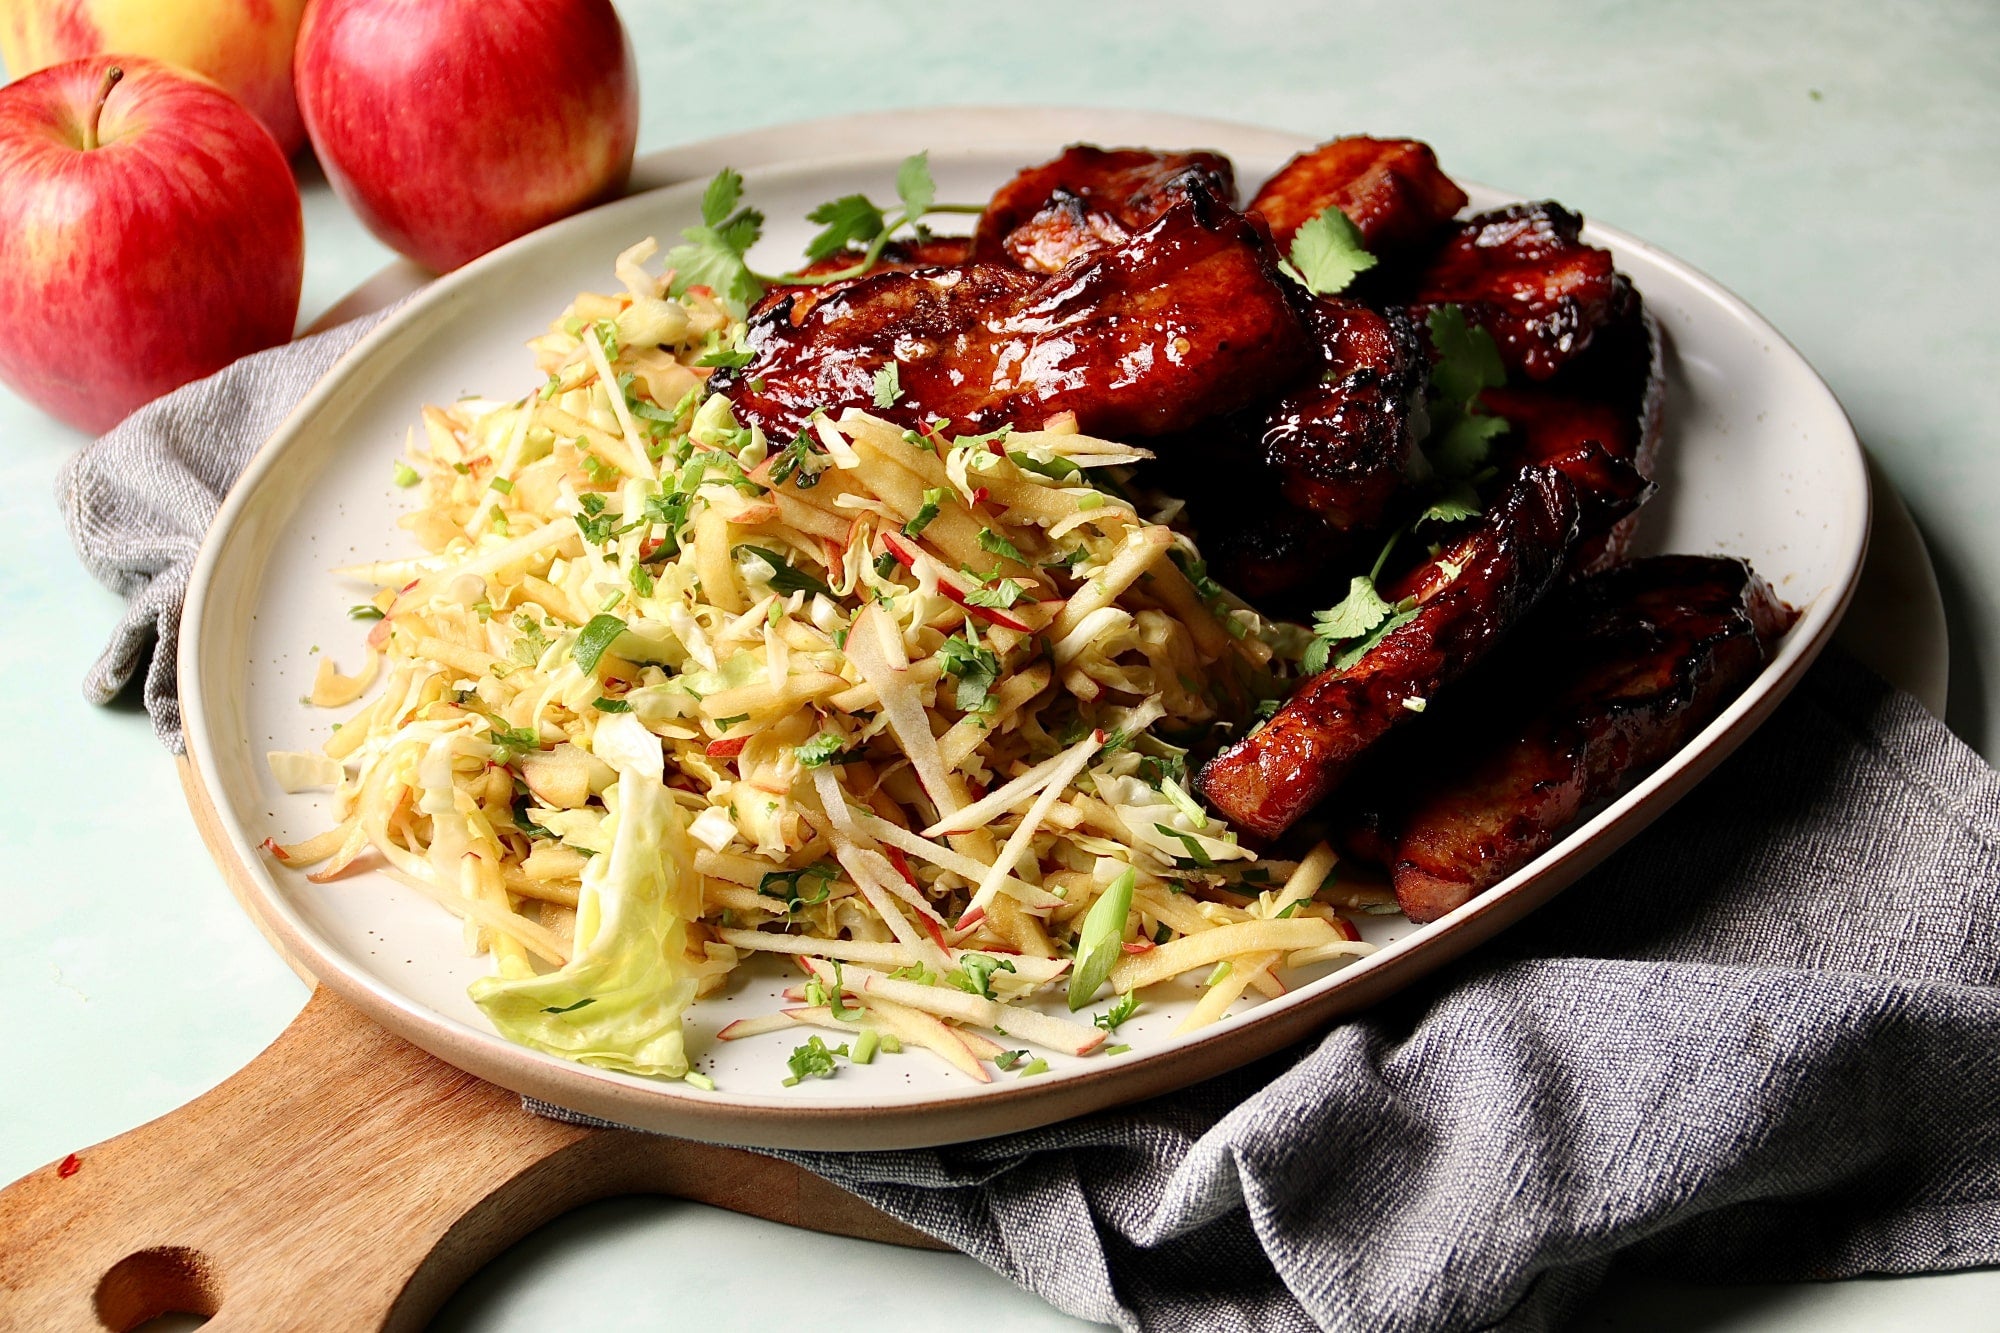 Plate of food containing pan fried, marinated pork belly and an apple slaw.